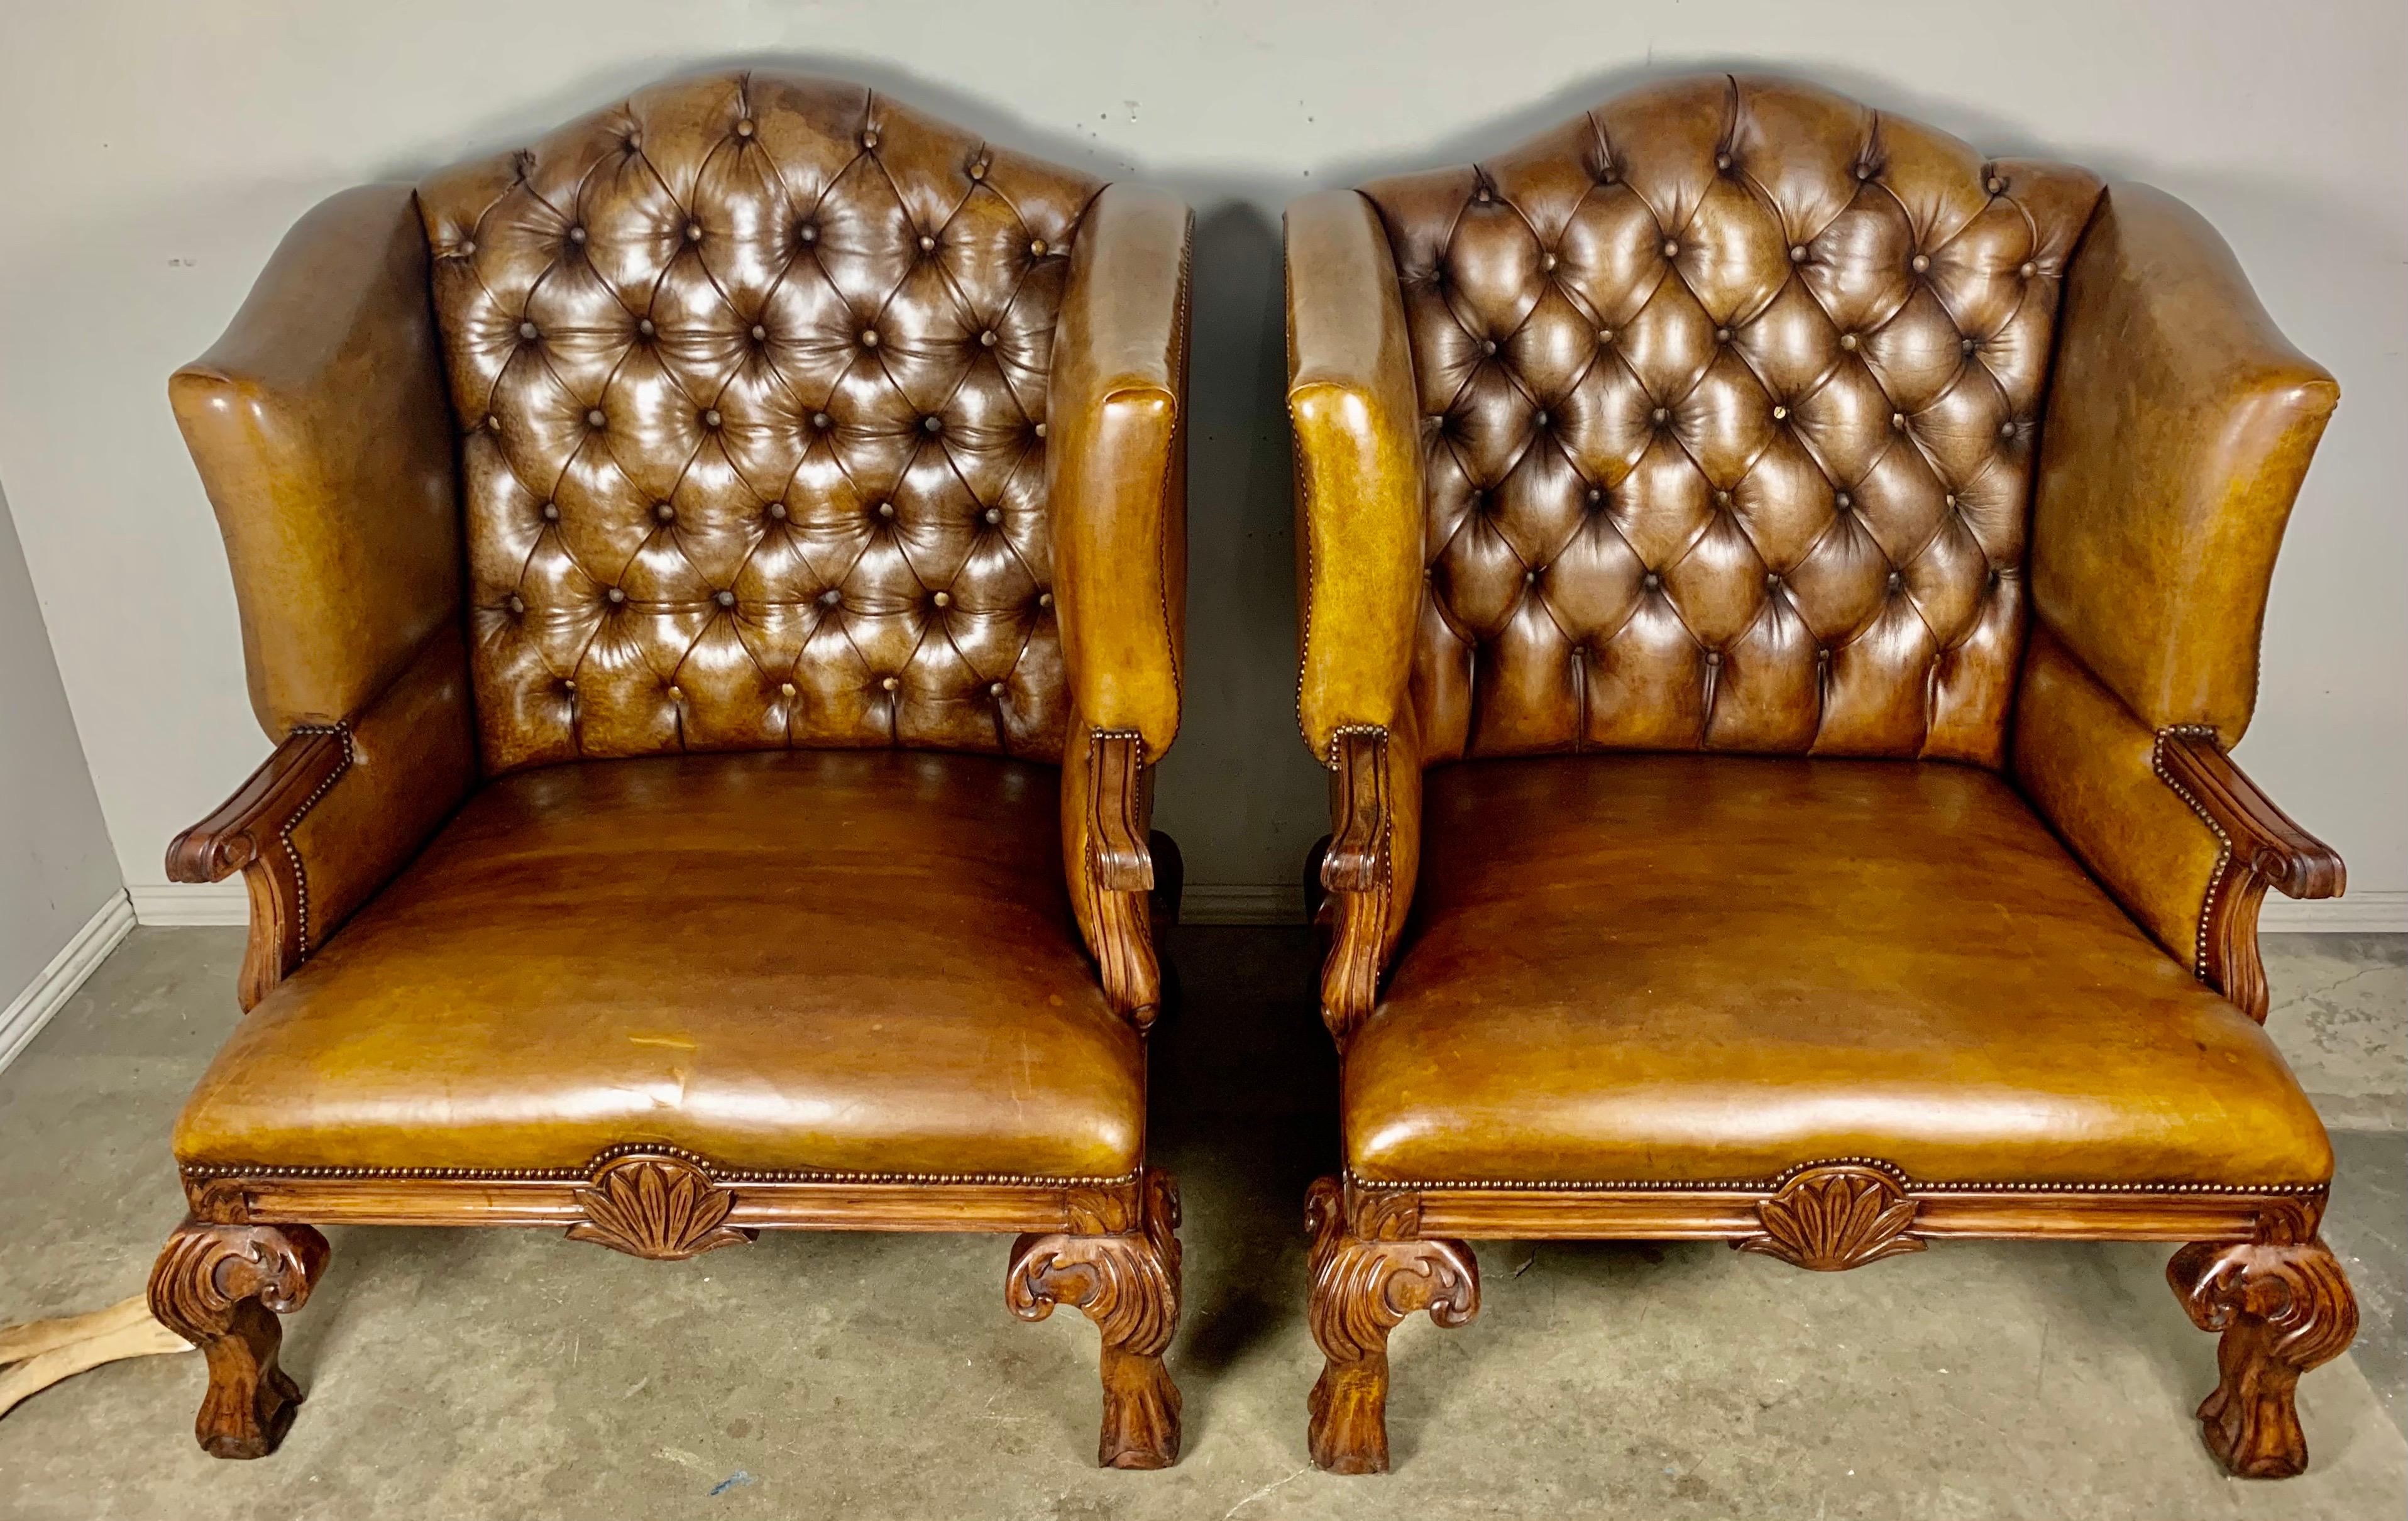 Pair of monumental English wingback leather armchairs that have tufted backs and nailhead trim detail. The chairs stand on four Queen Anne style legs with lion paw feet. The leather is in excellent condition with a slight imperfection in one of the